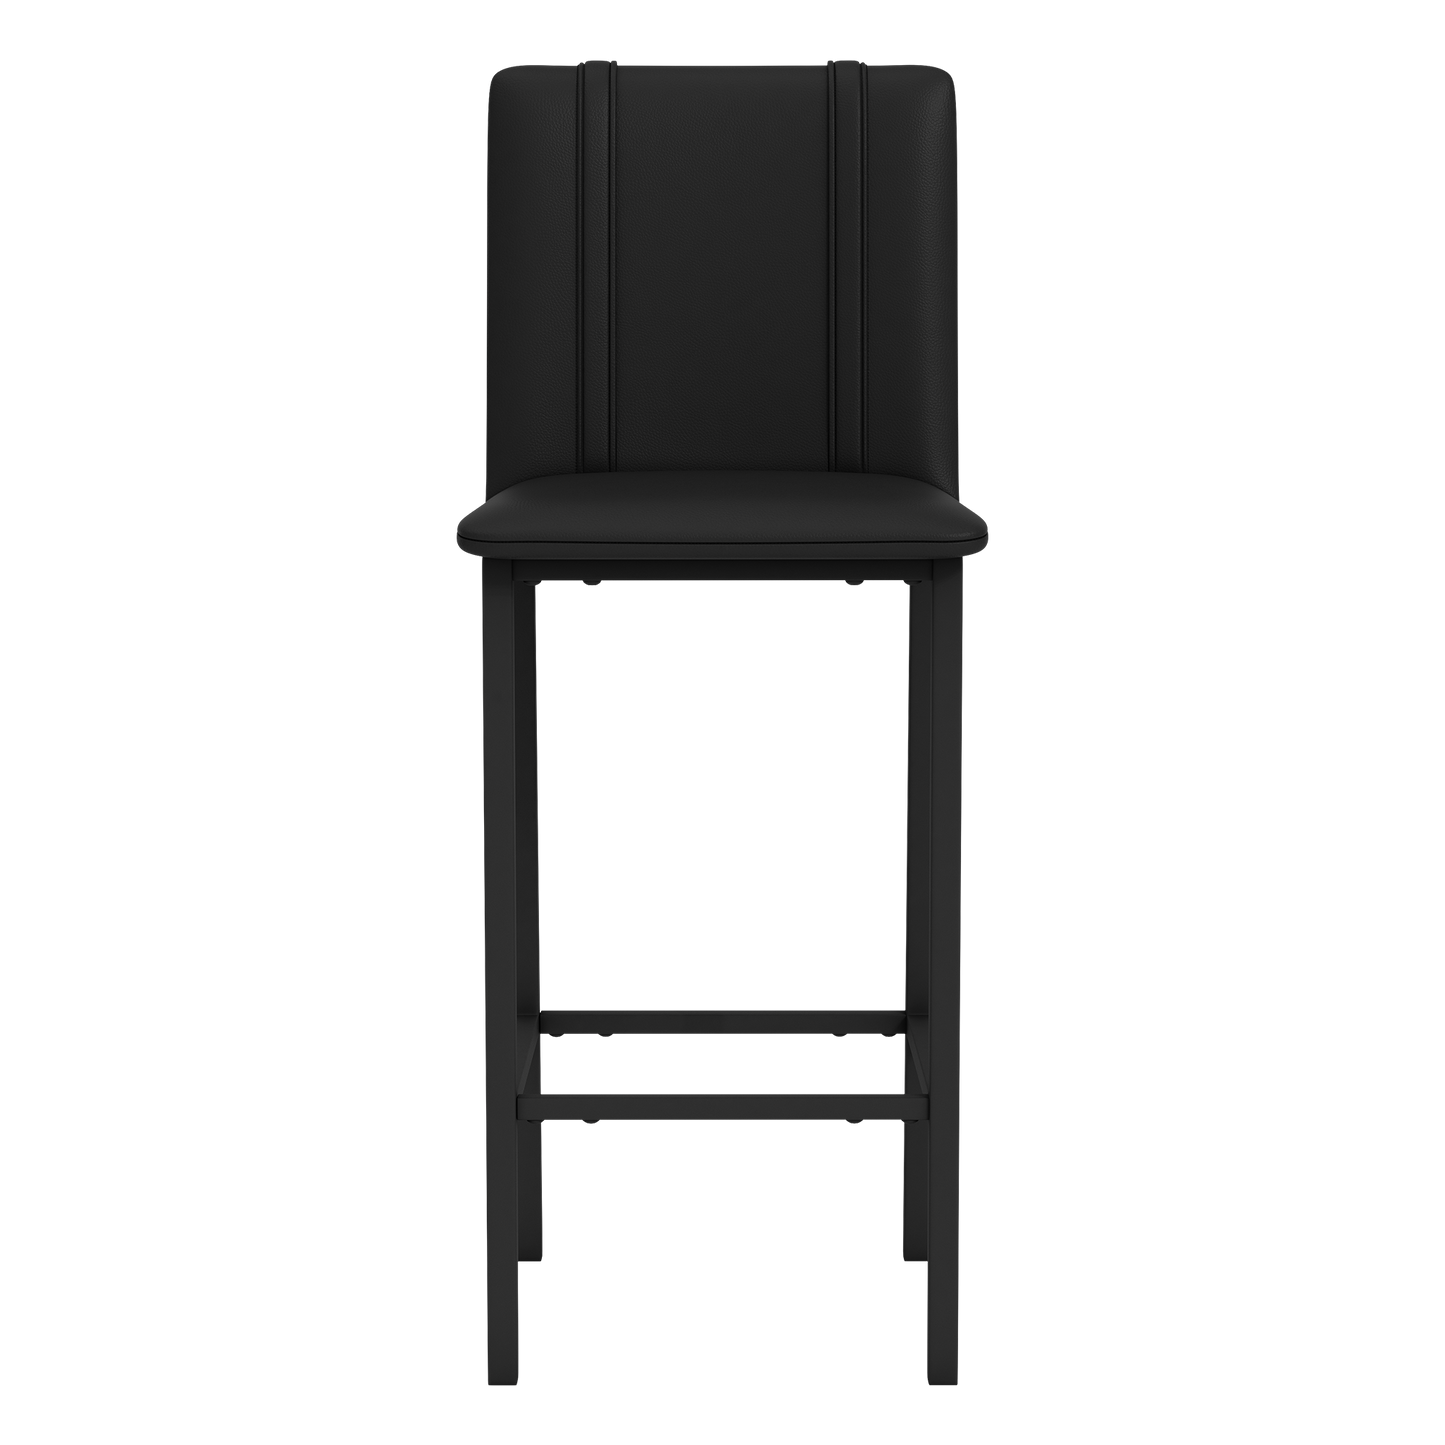 Bar Stool 500 with Cleveland Browns Classic Logo Set of 2